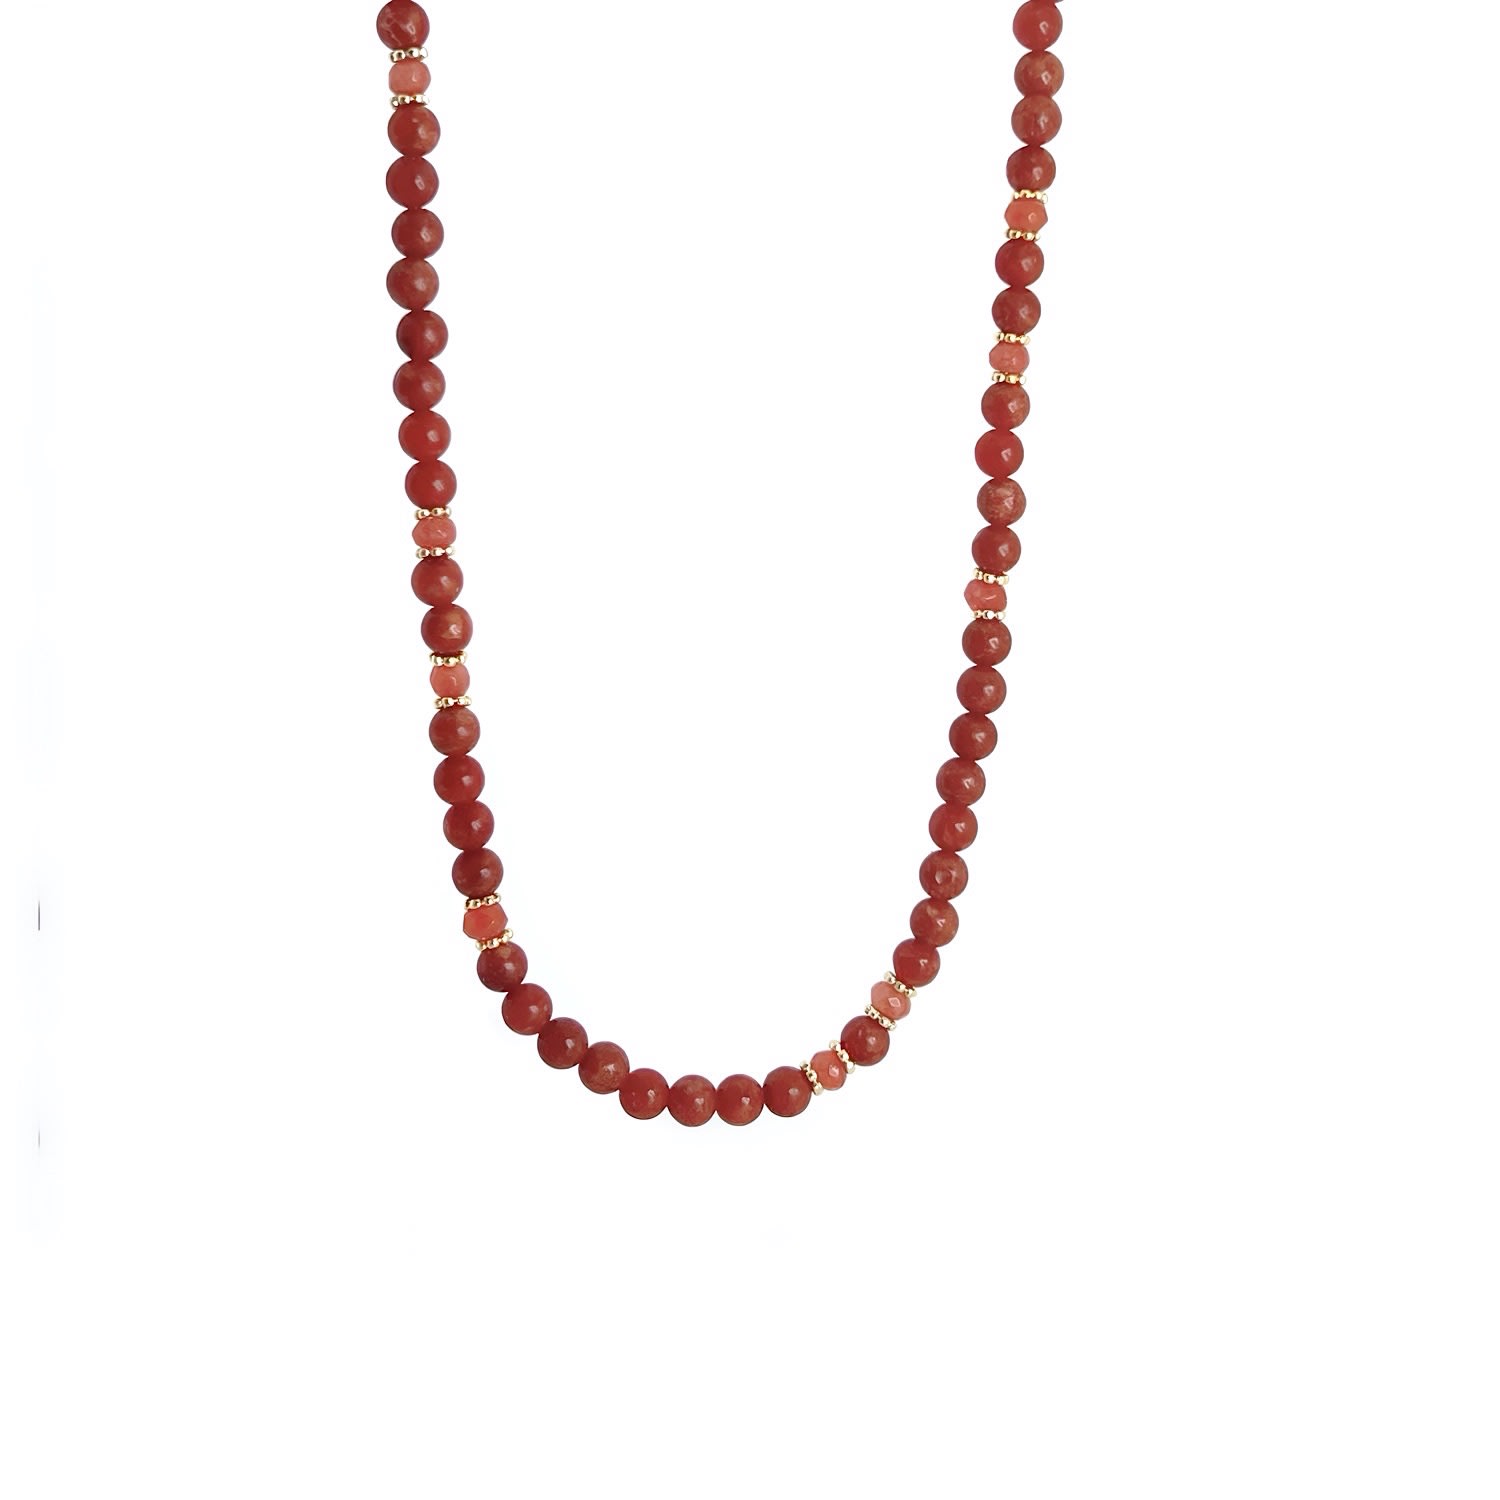 Cvlcha Women's Red Adiana Coral Necklace